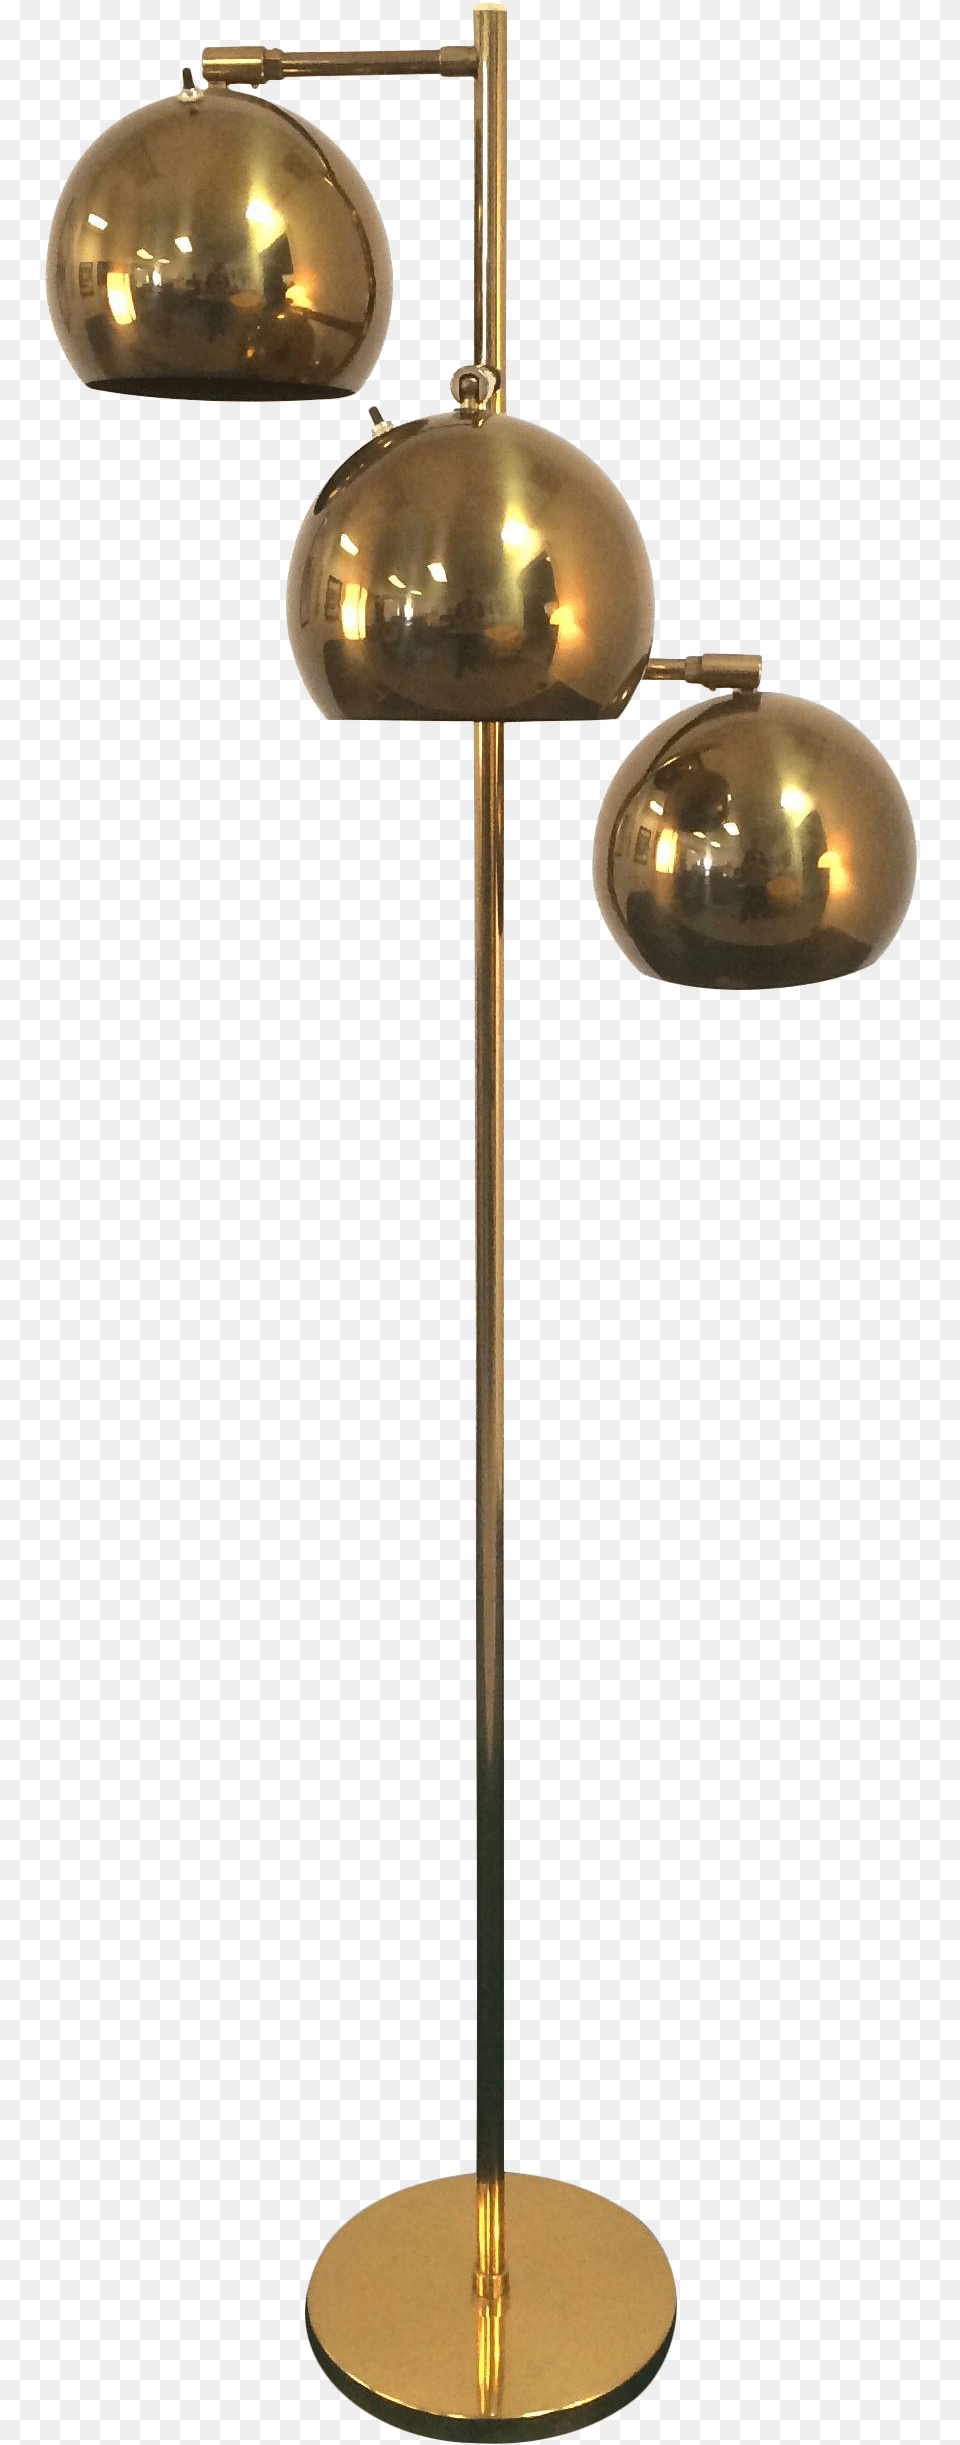 Koch Lowy Orb M Lamp, Lampshade Png Image